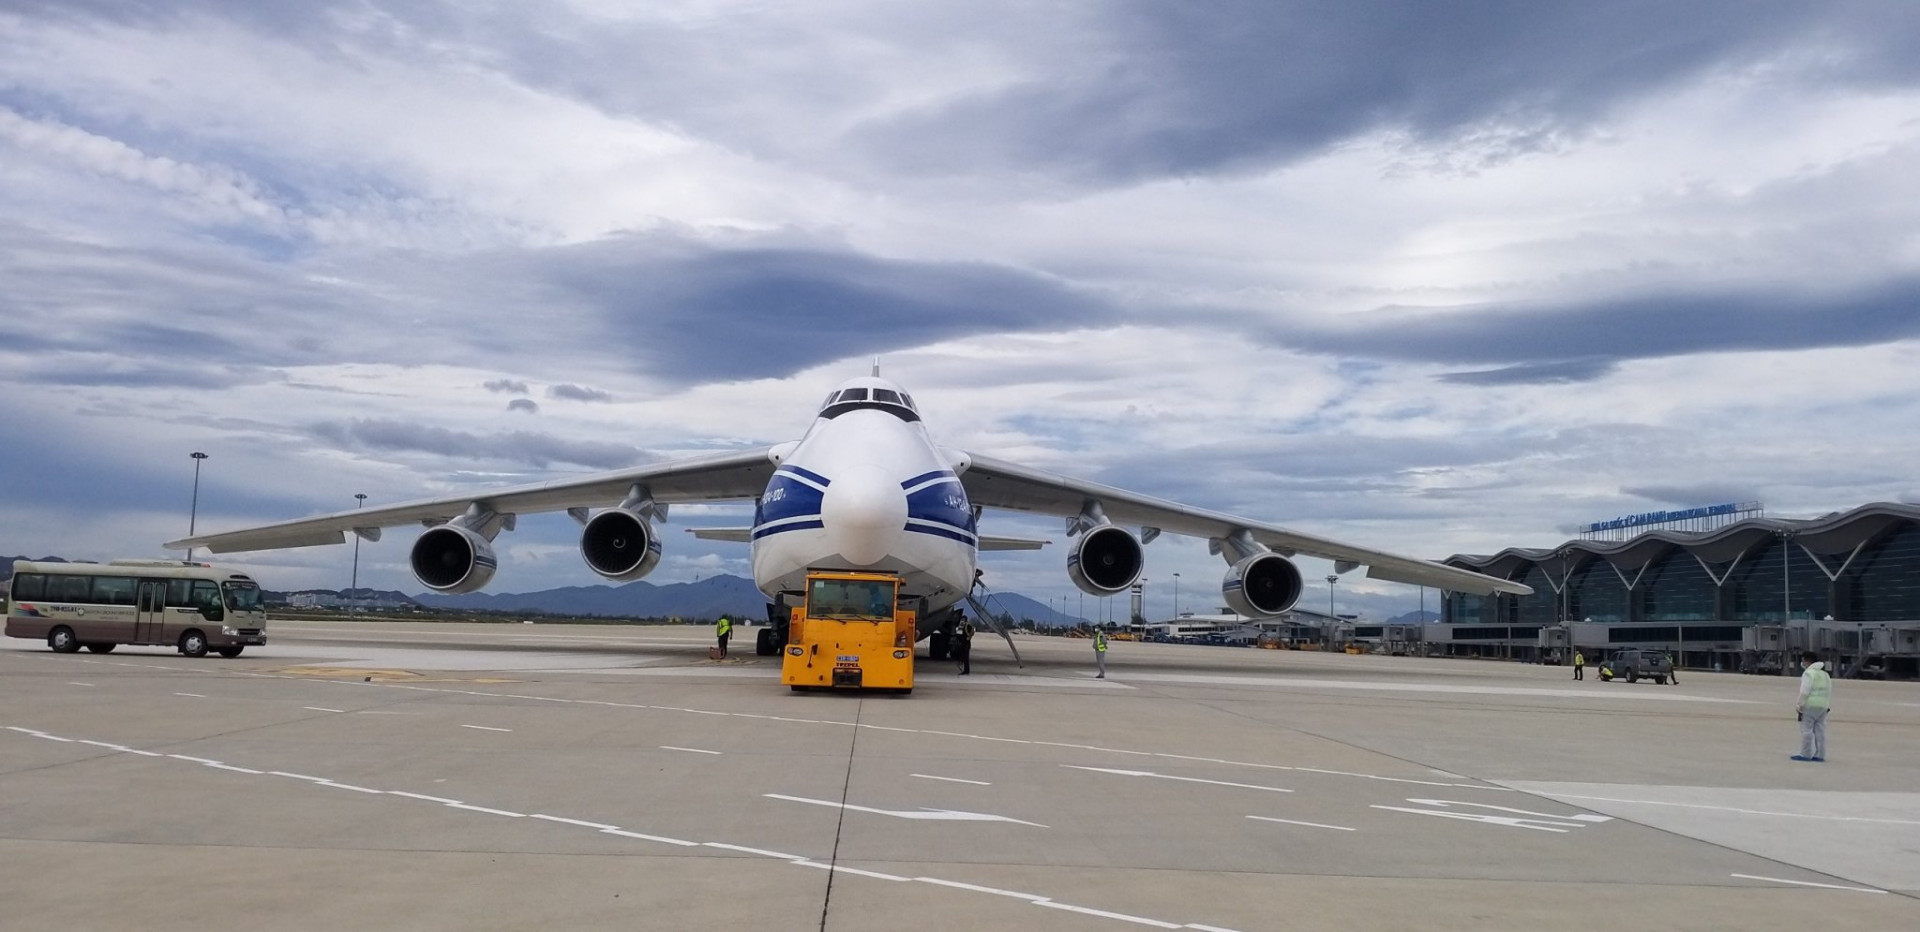 The world’s 2nd largest transport aircraft lands at Cam Ranh International Airport.